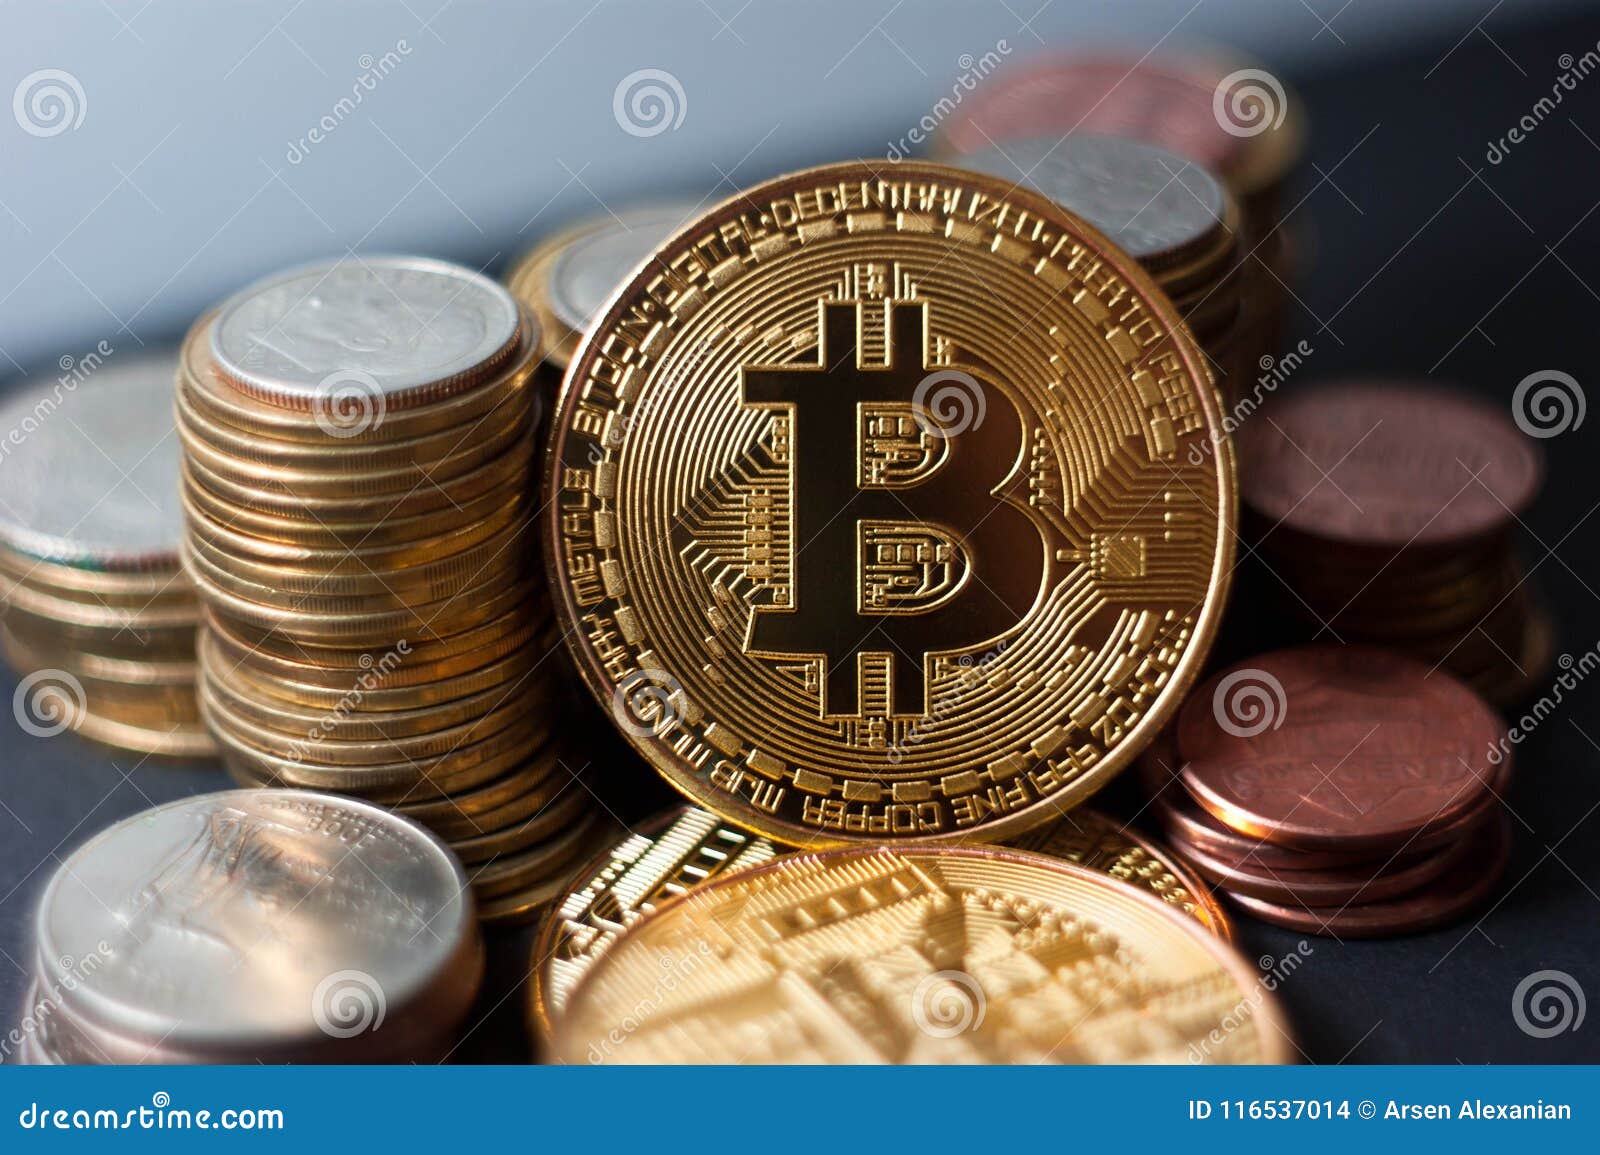 Golden Bitcoin With Money Coins Background Bit Coin Cryptocurrency Banking Money Transfer Business Technology Stock Photo Image Of Online Banking